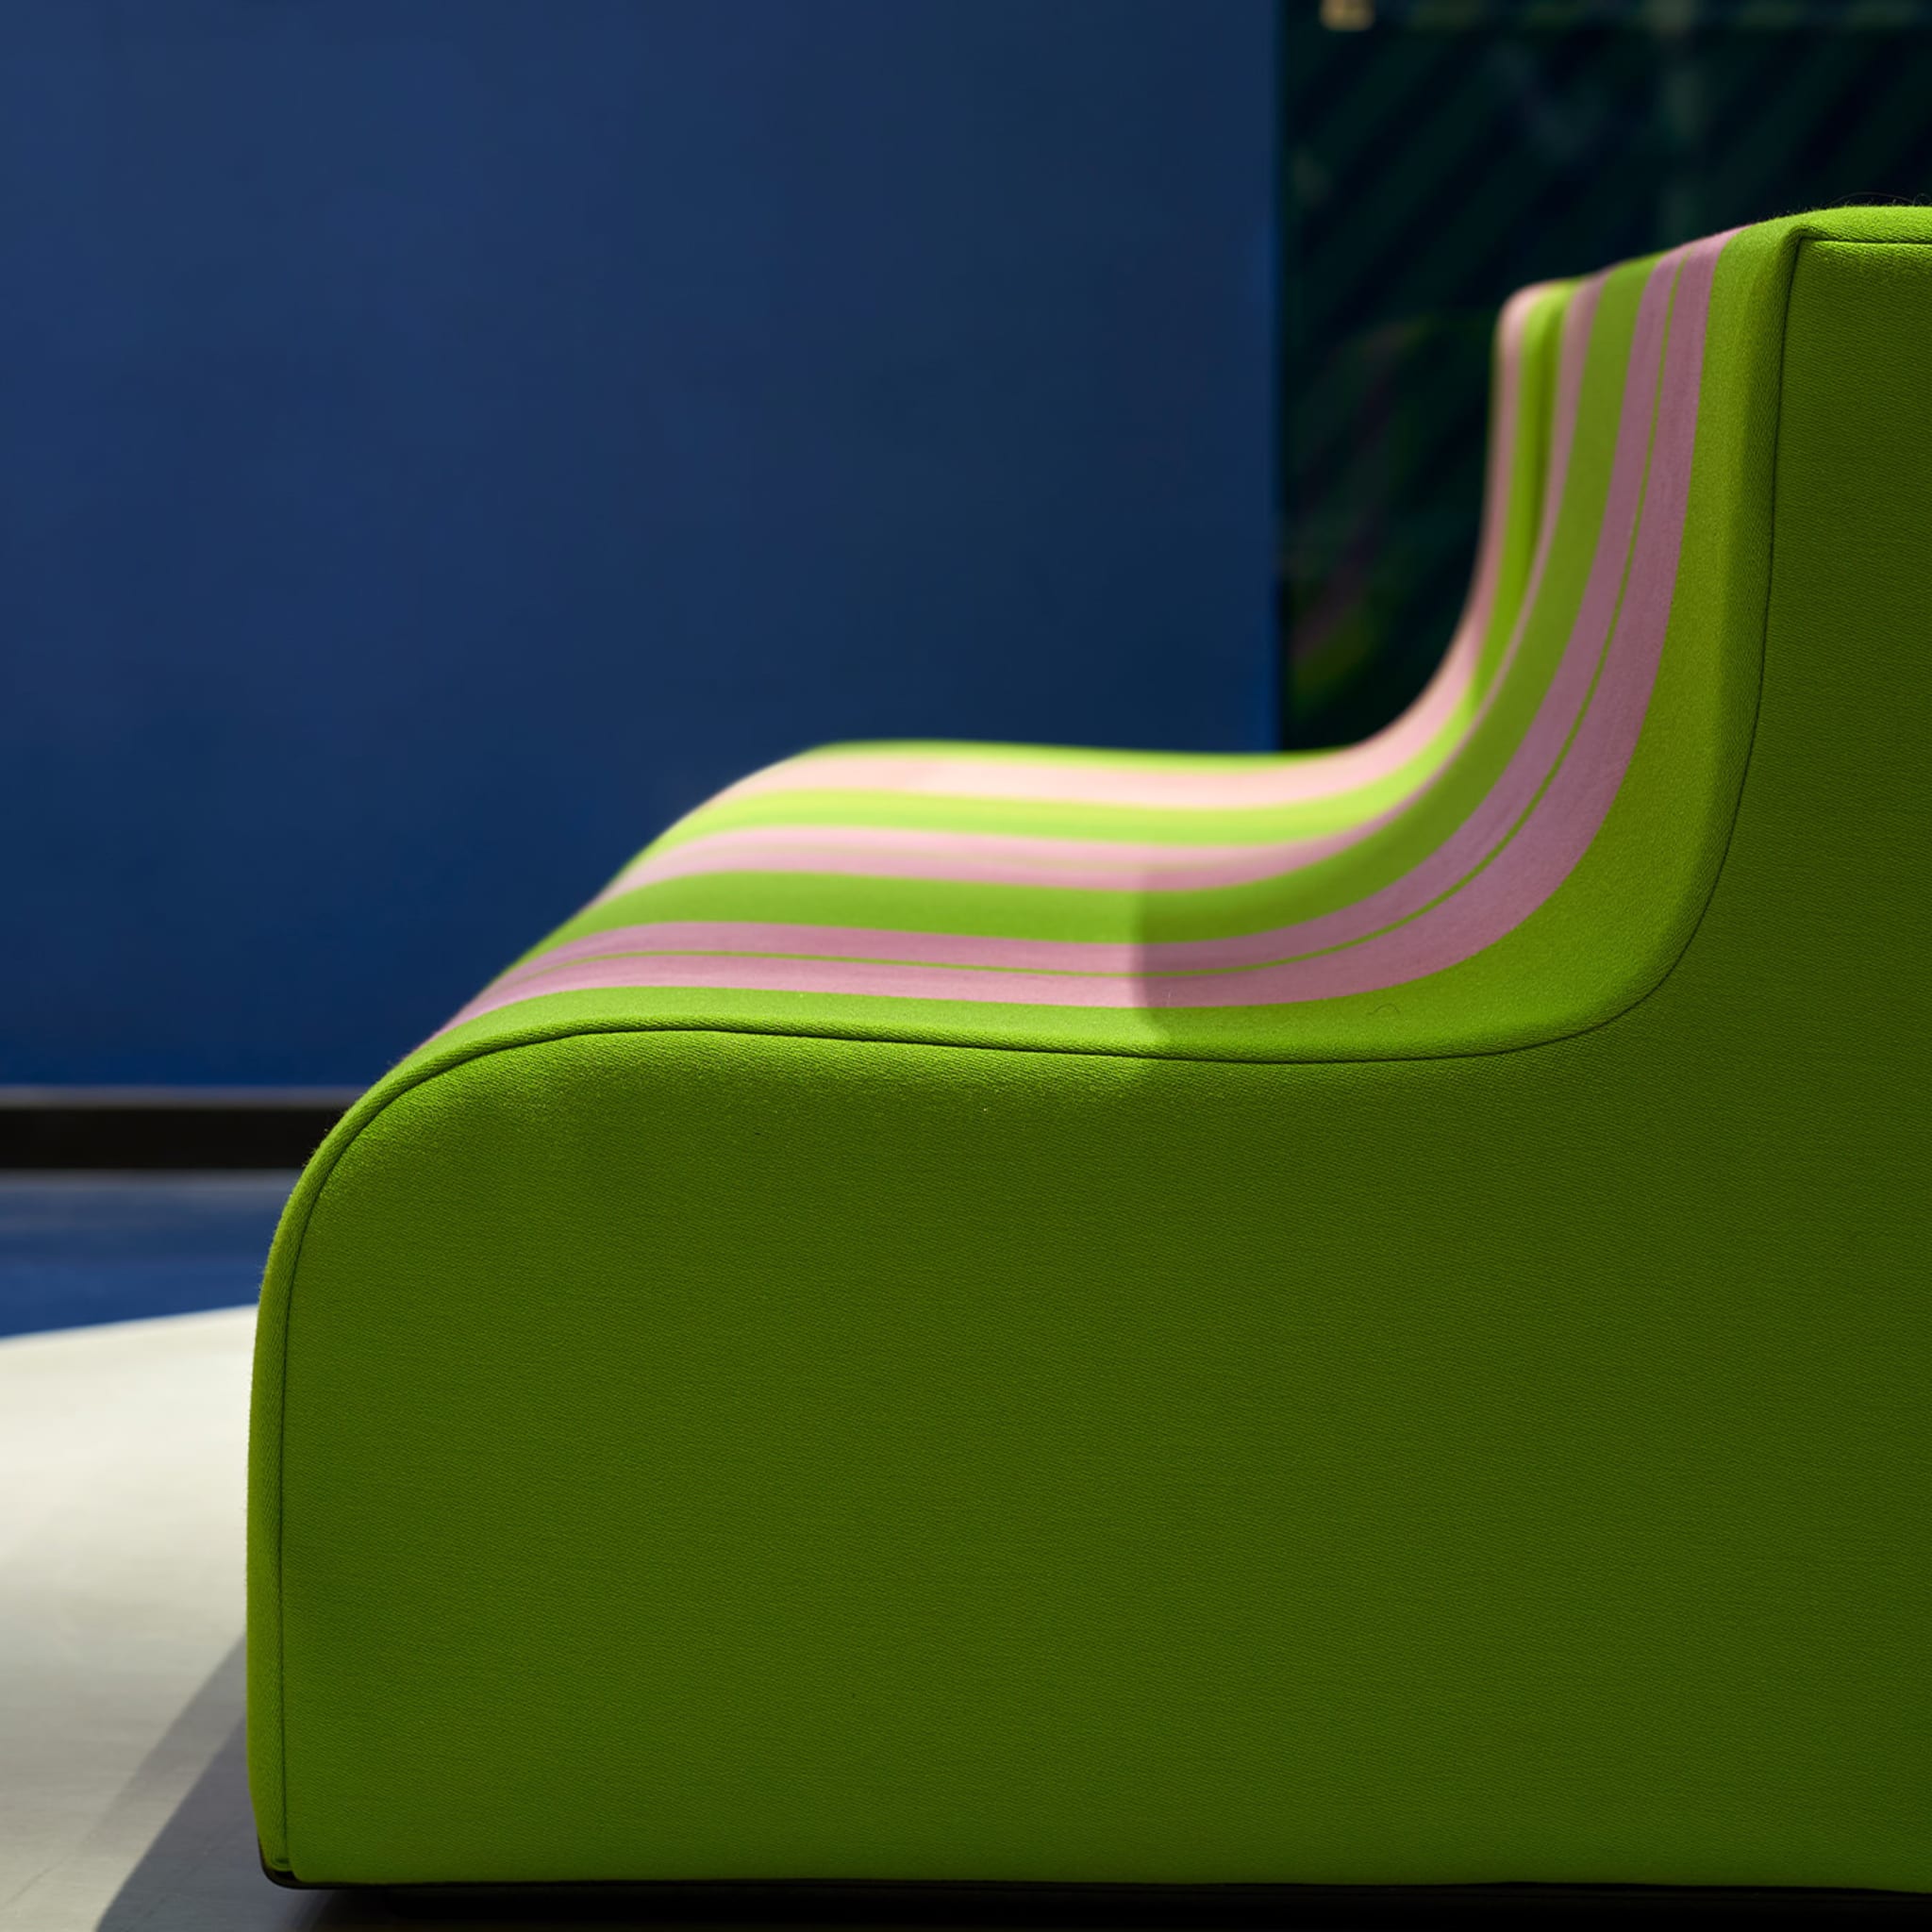 Sofo Green and Pink Sofa - Alternative view 3